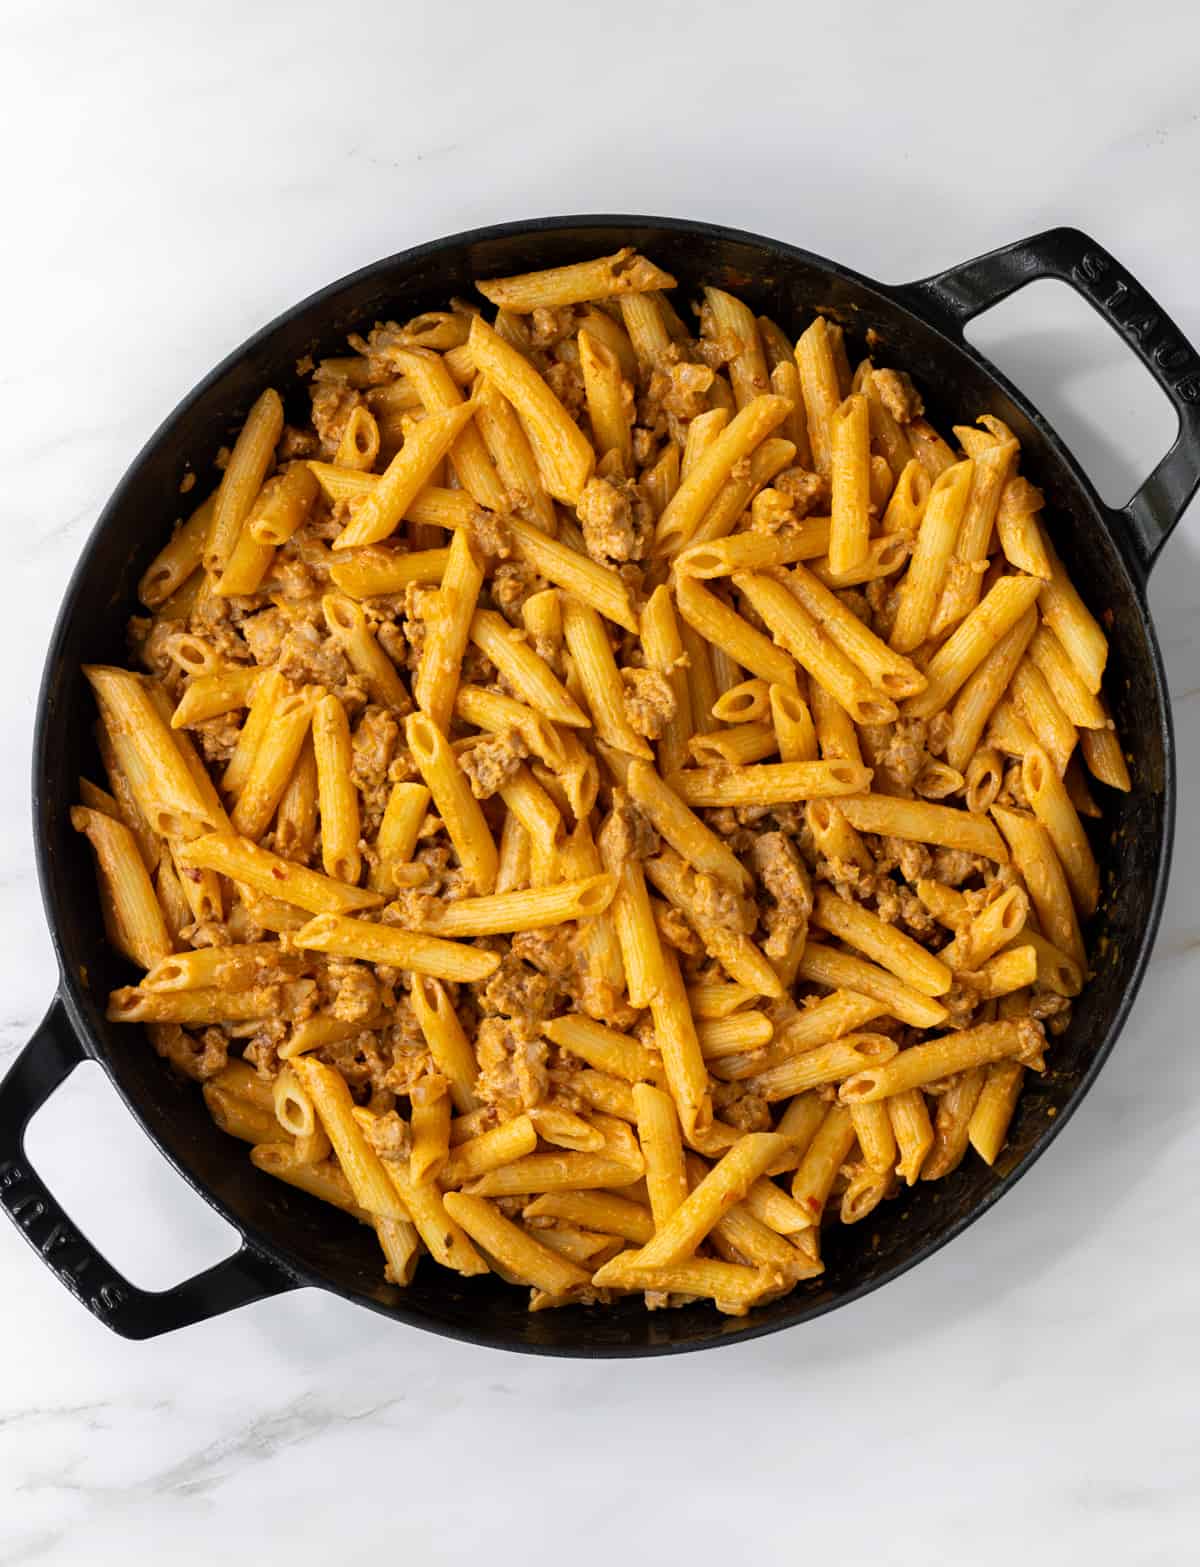 Spicy sausage pasta in a skillet.